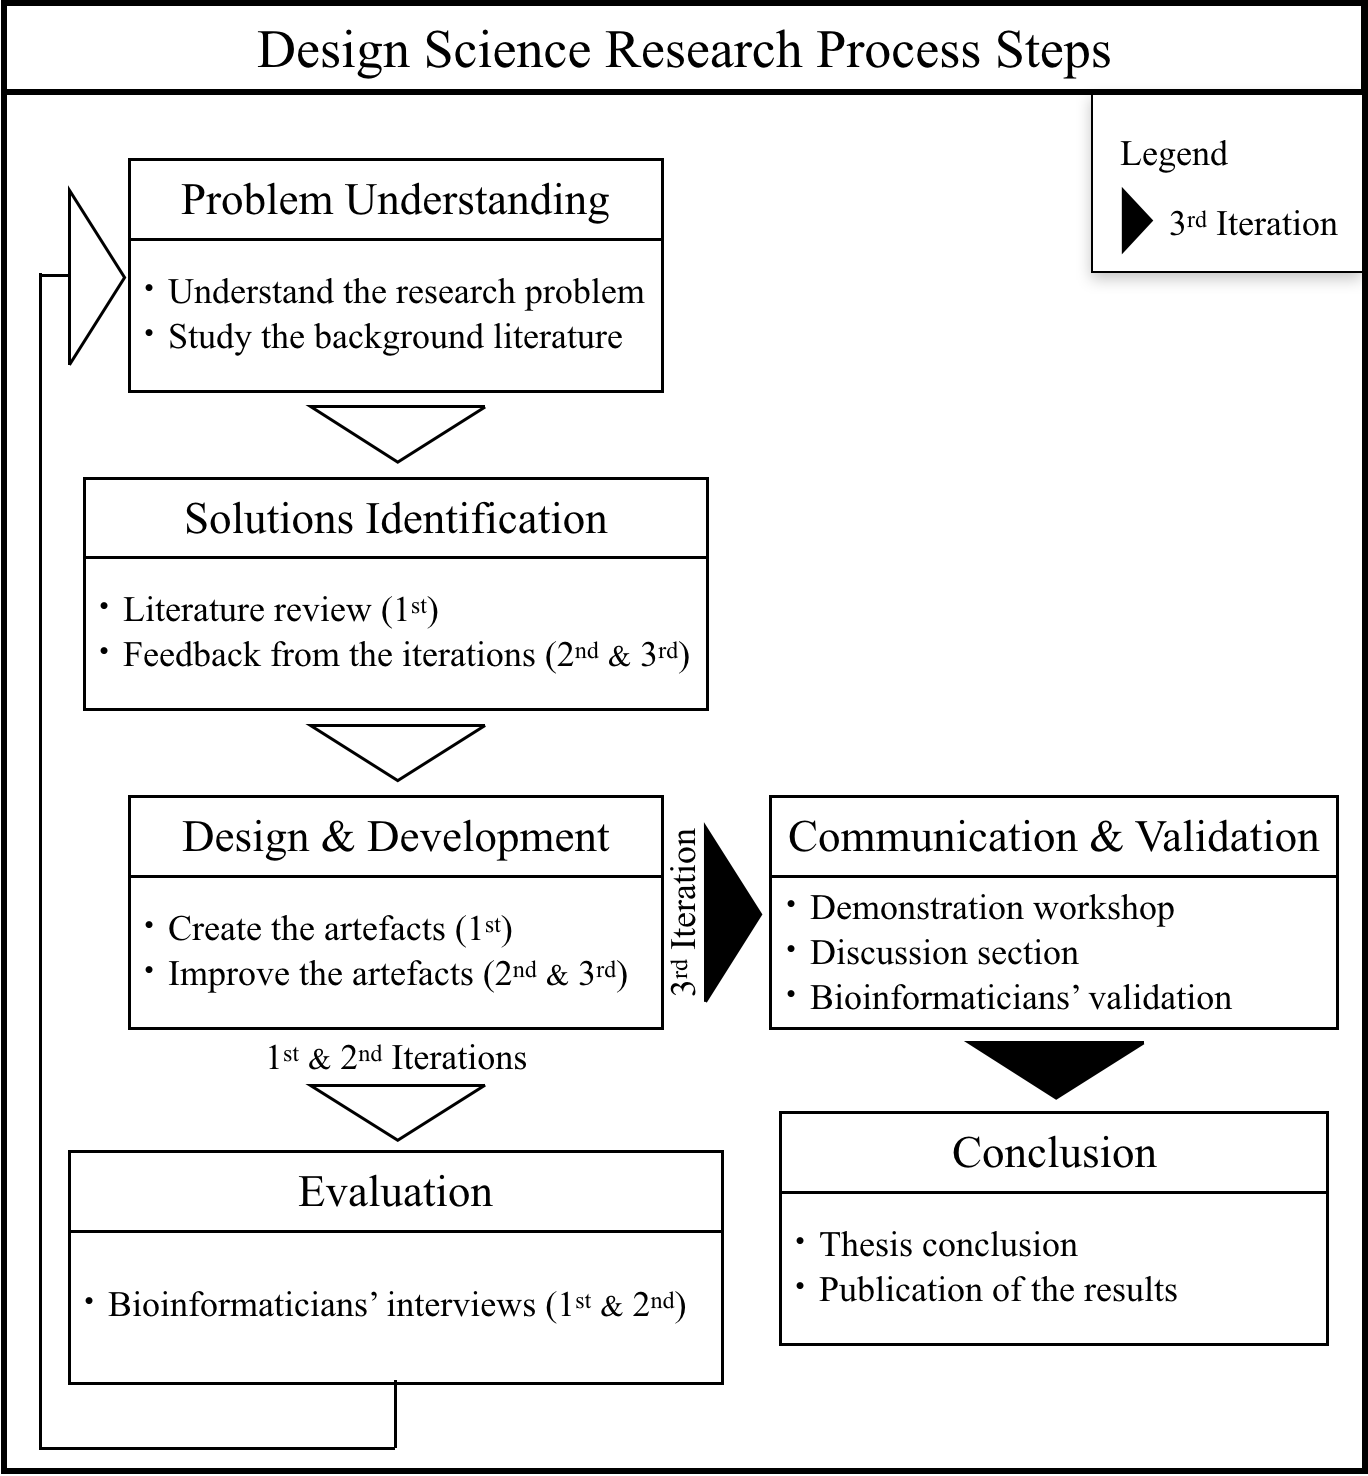 Depiction of the DSRM methodology used in this thesis